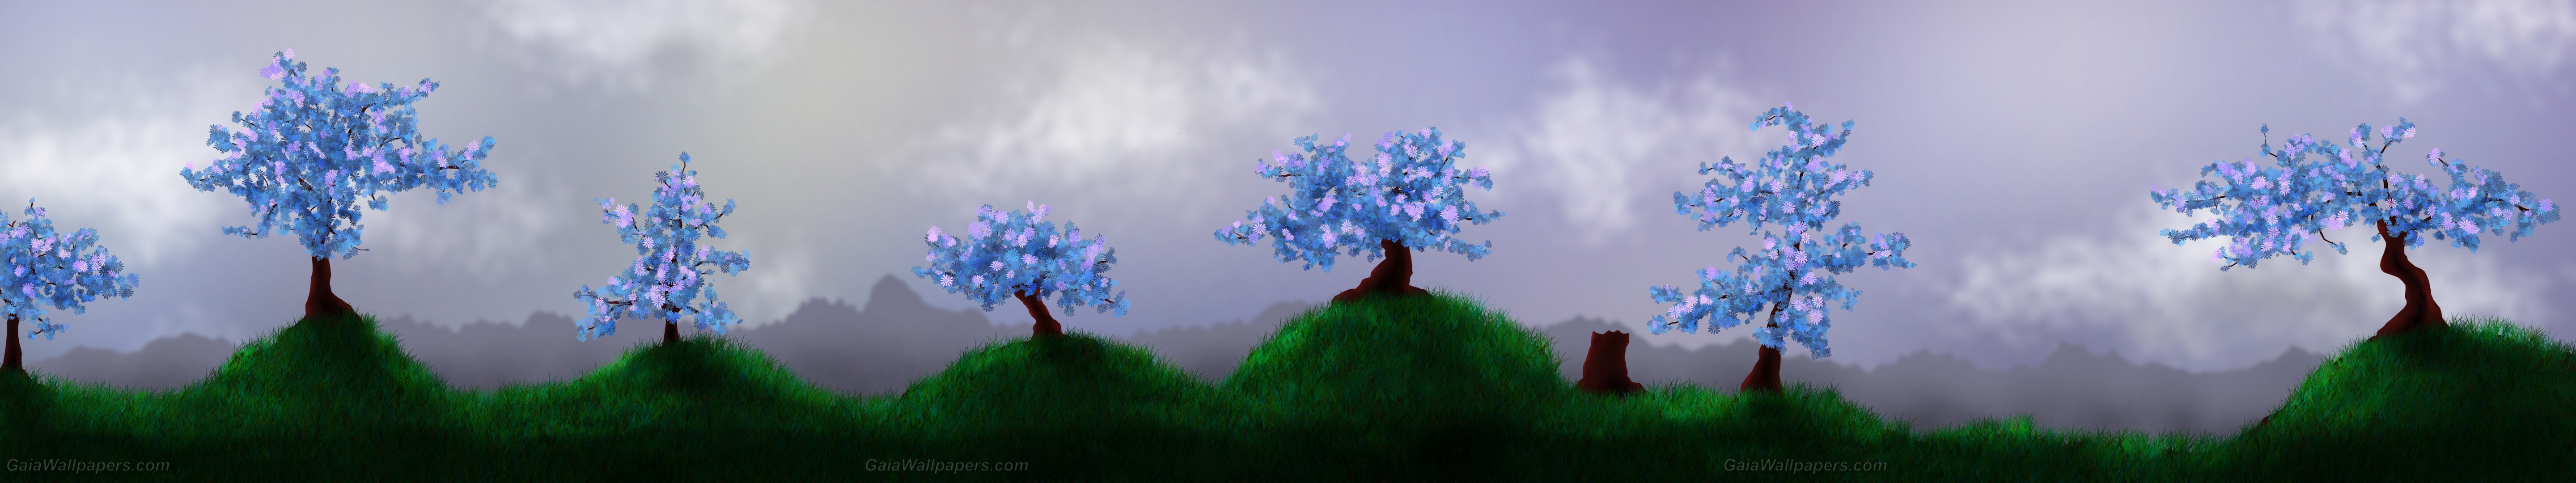 Trees in bloom in a world of serenity - Free desktop wallpapers